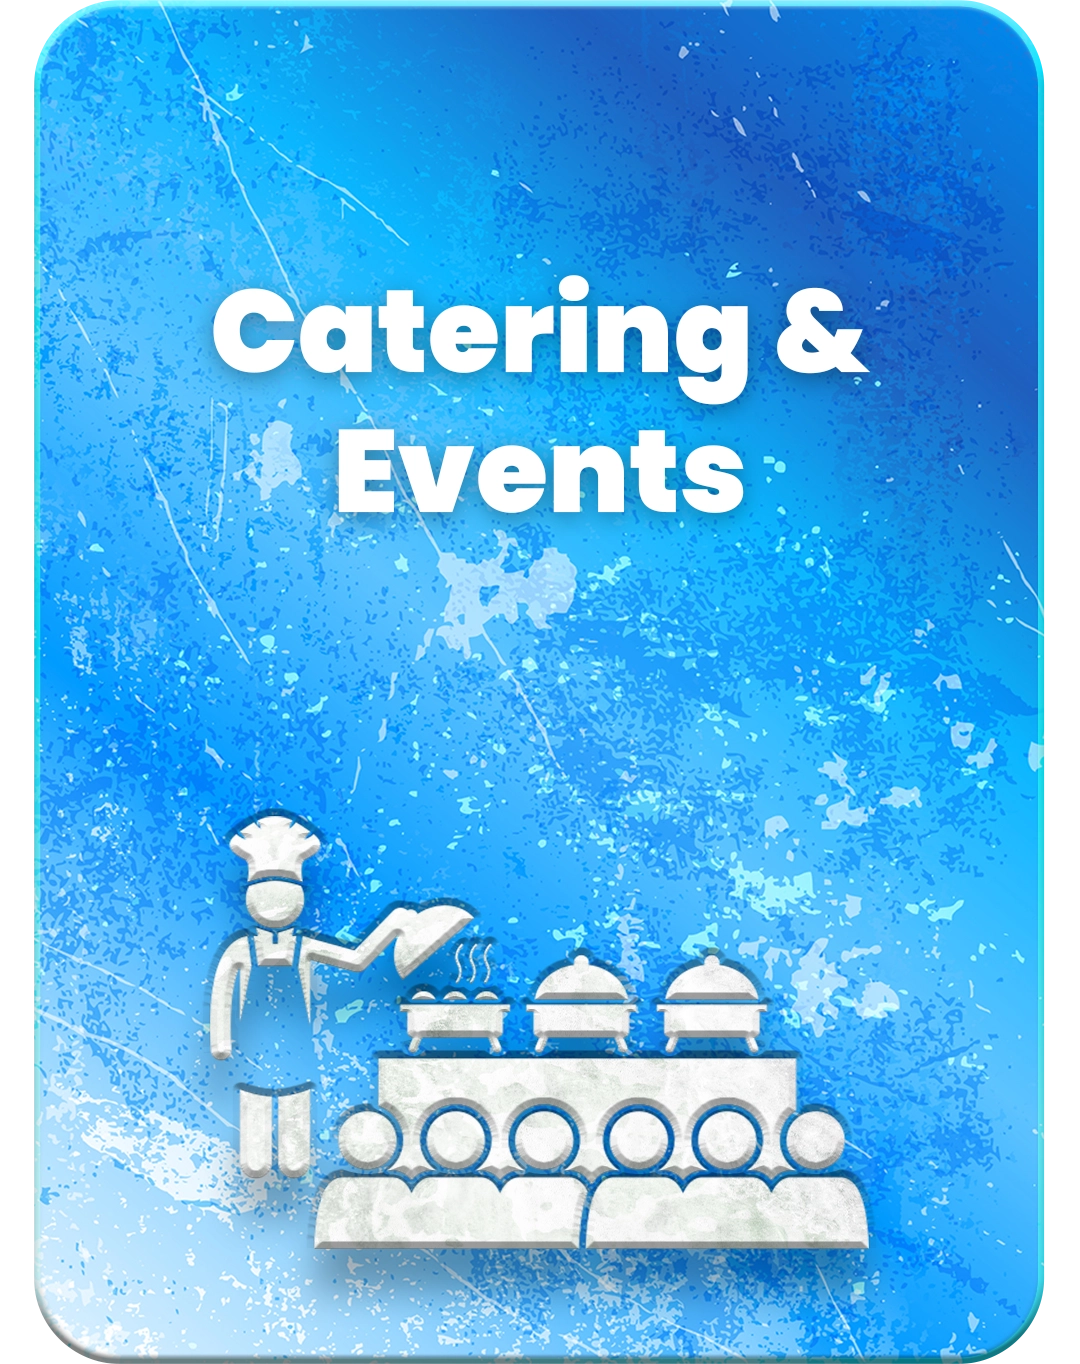 Catering & Ecents